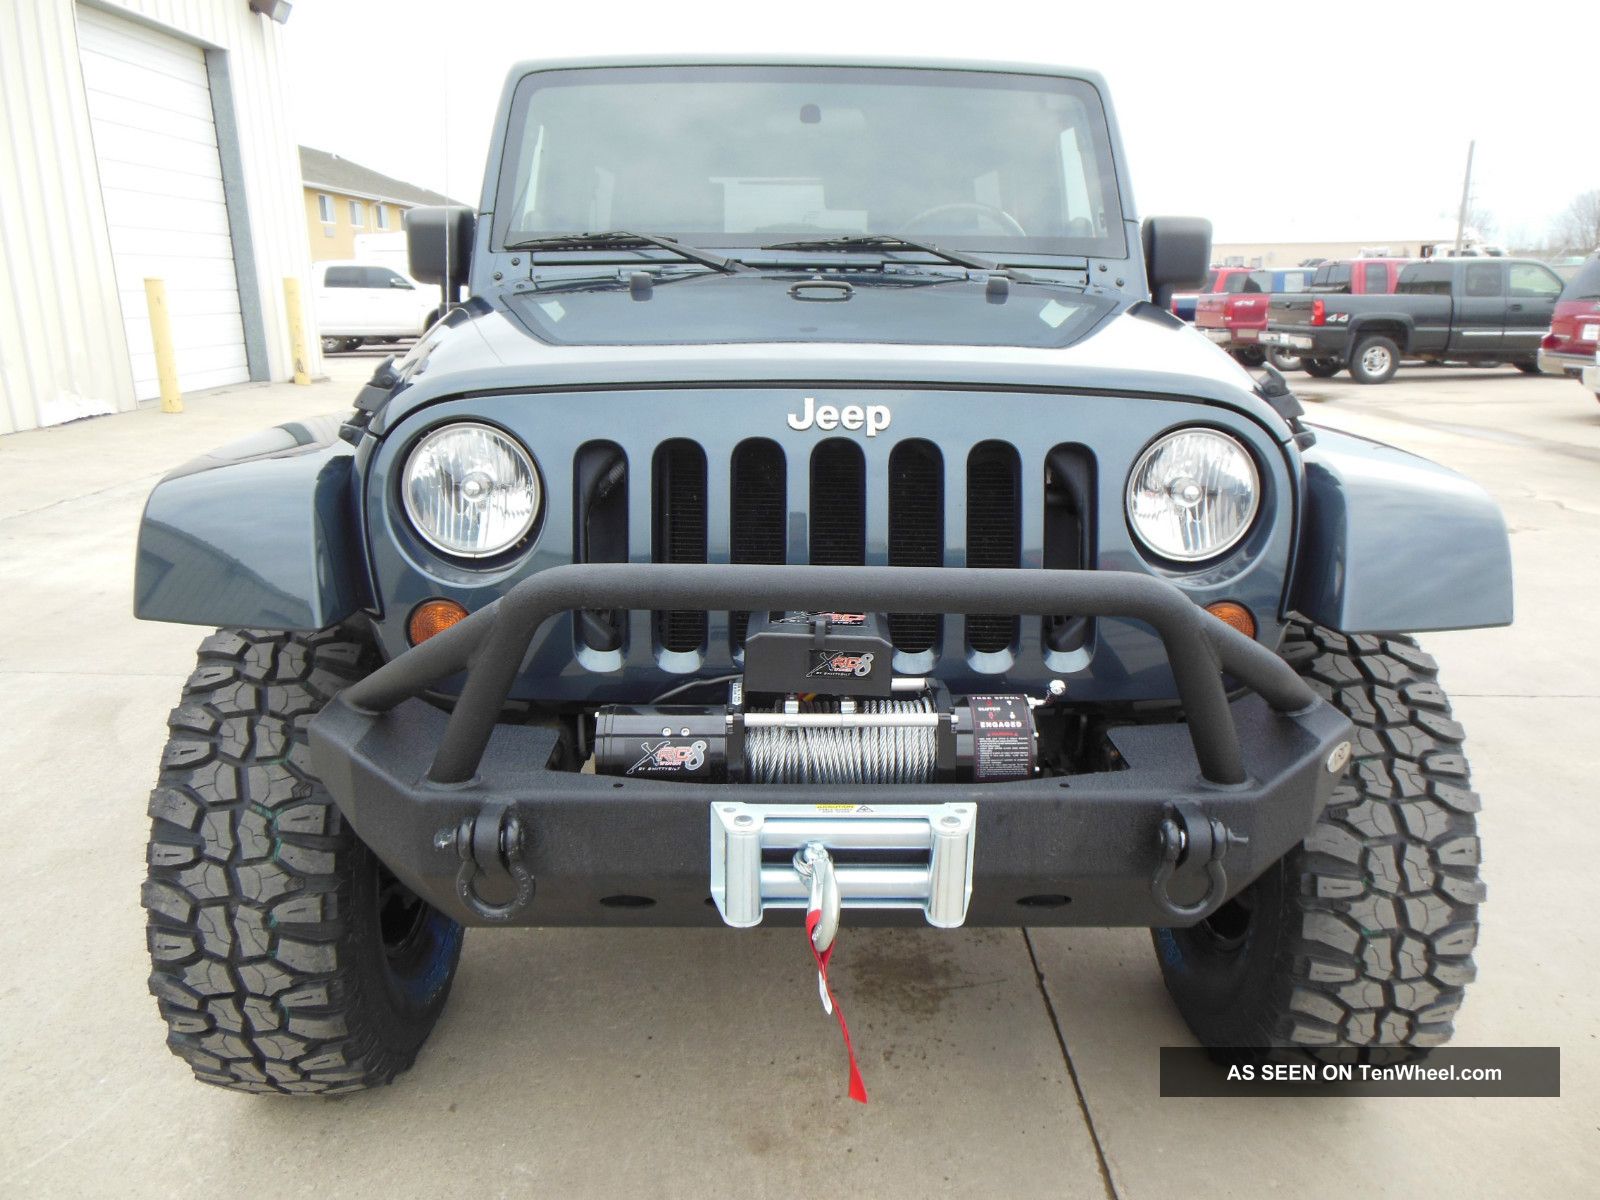 2008 Jeep wrangler unlimited bumpers #5